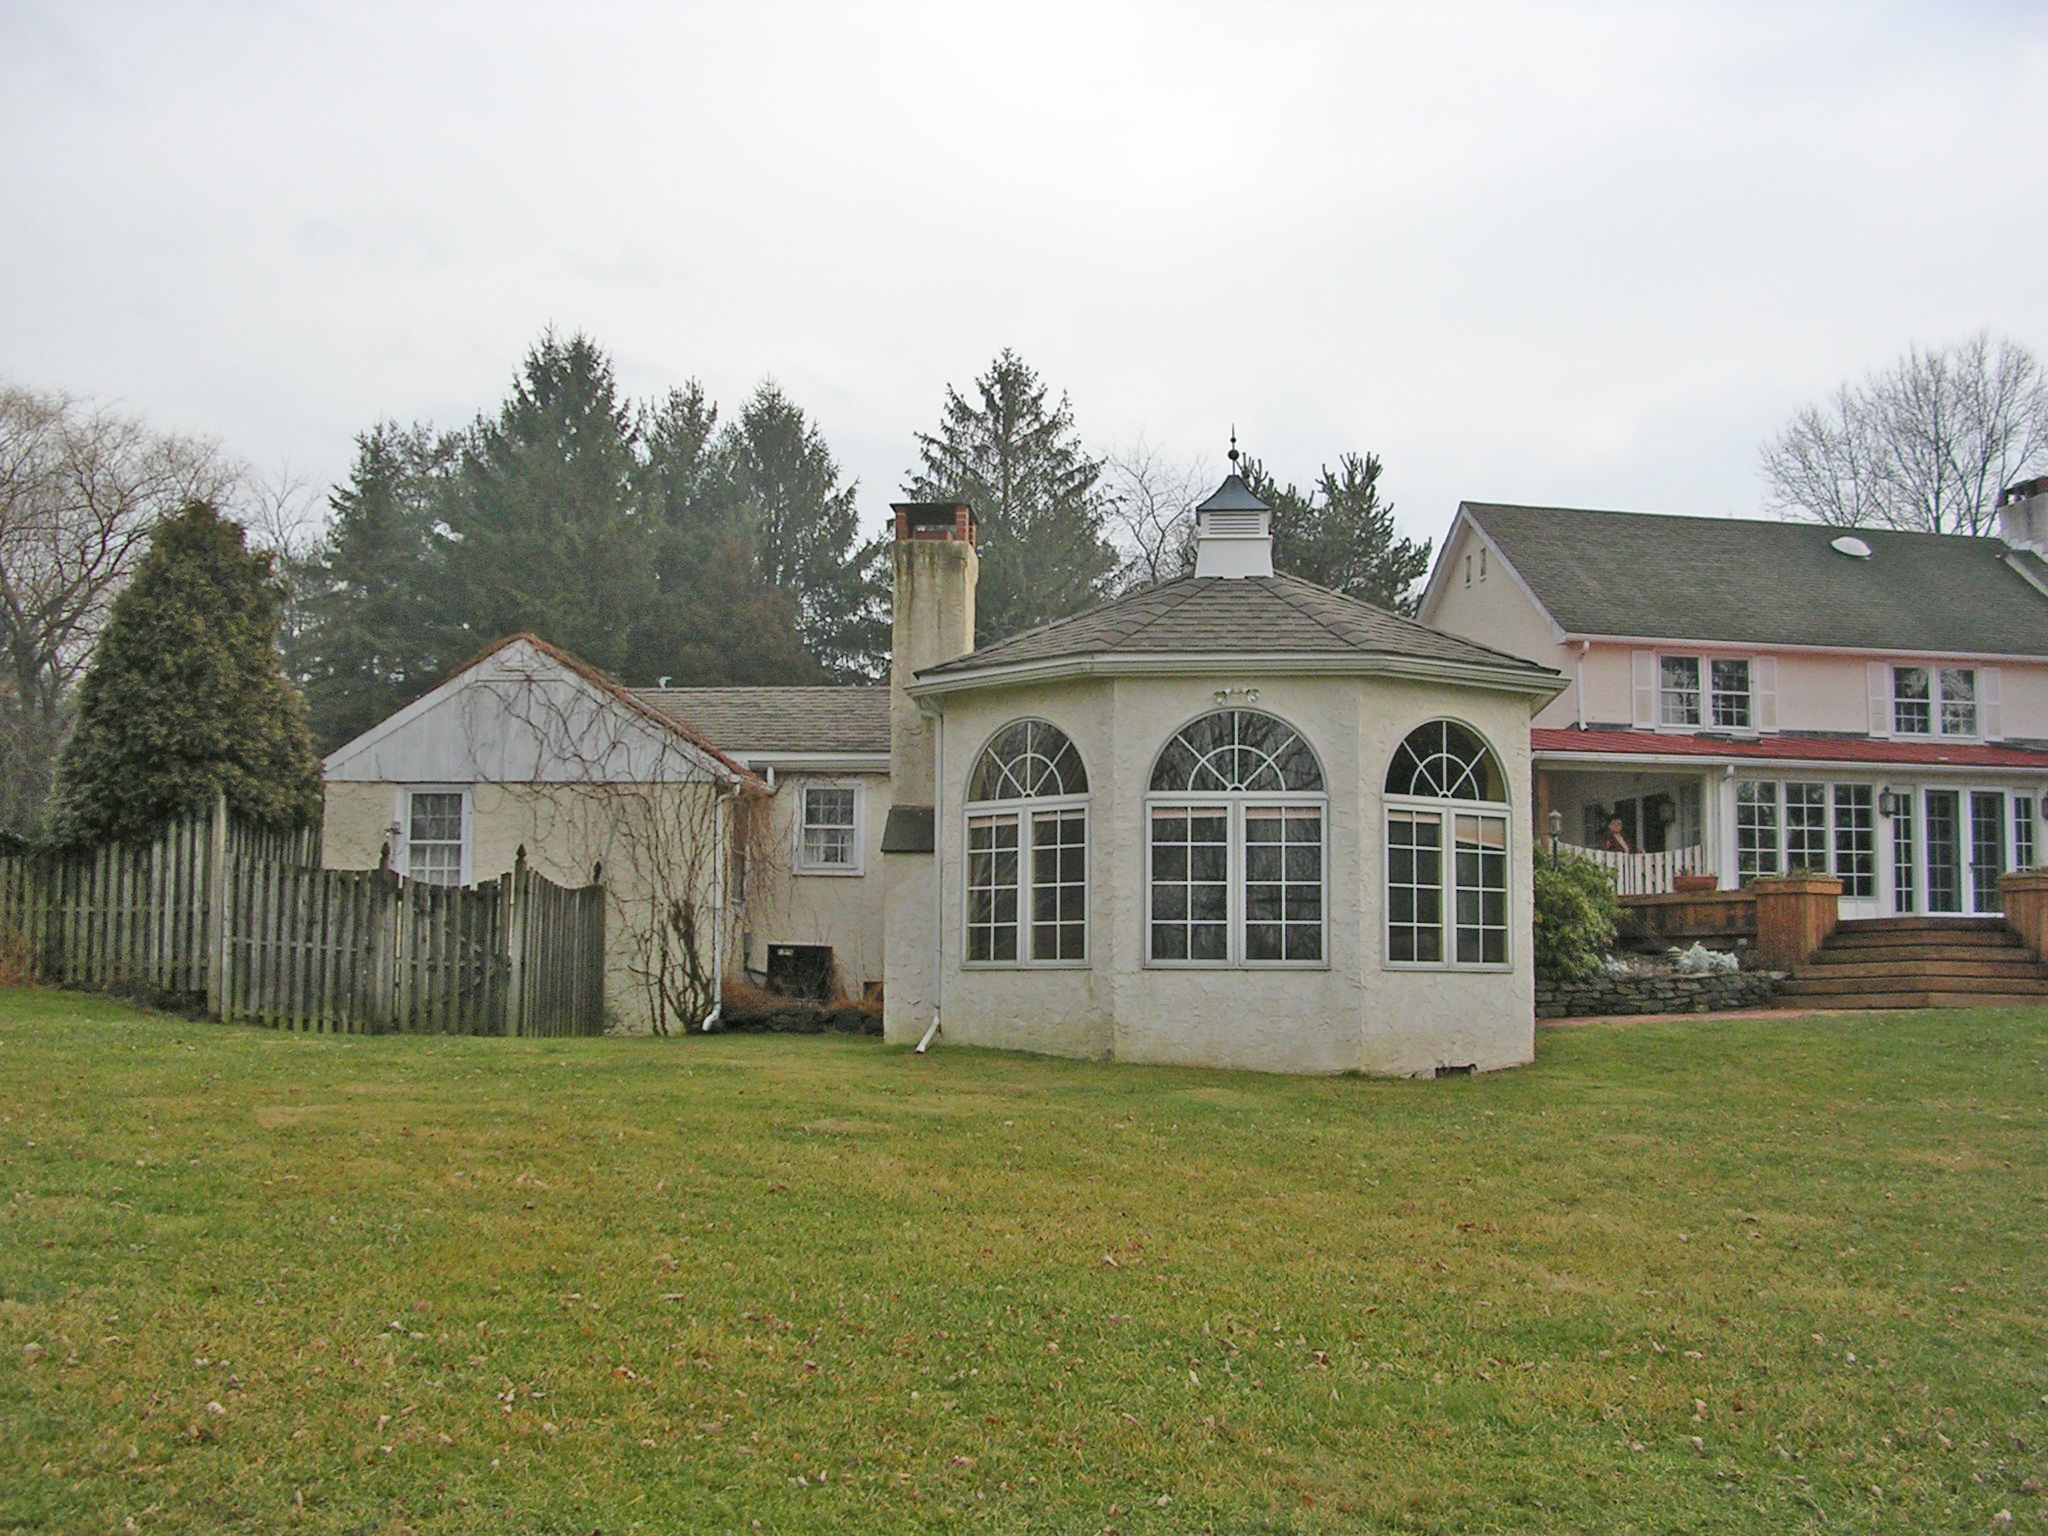 sold-at-auction-trophy-bucks-county-property-doylestown-pa